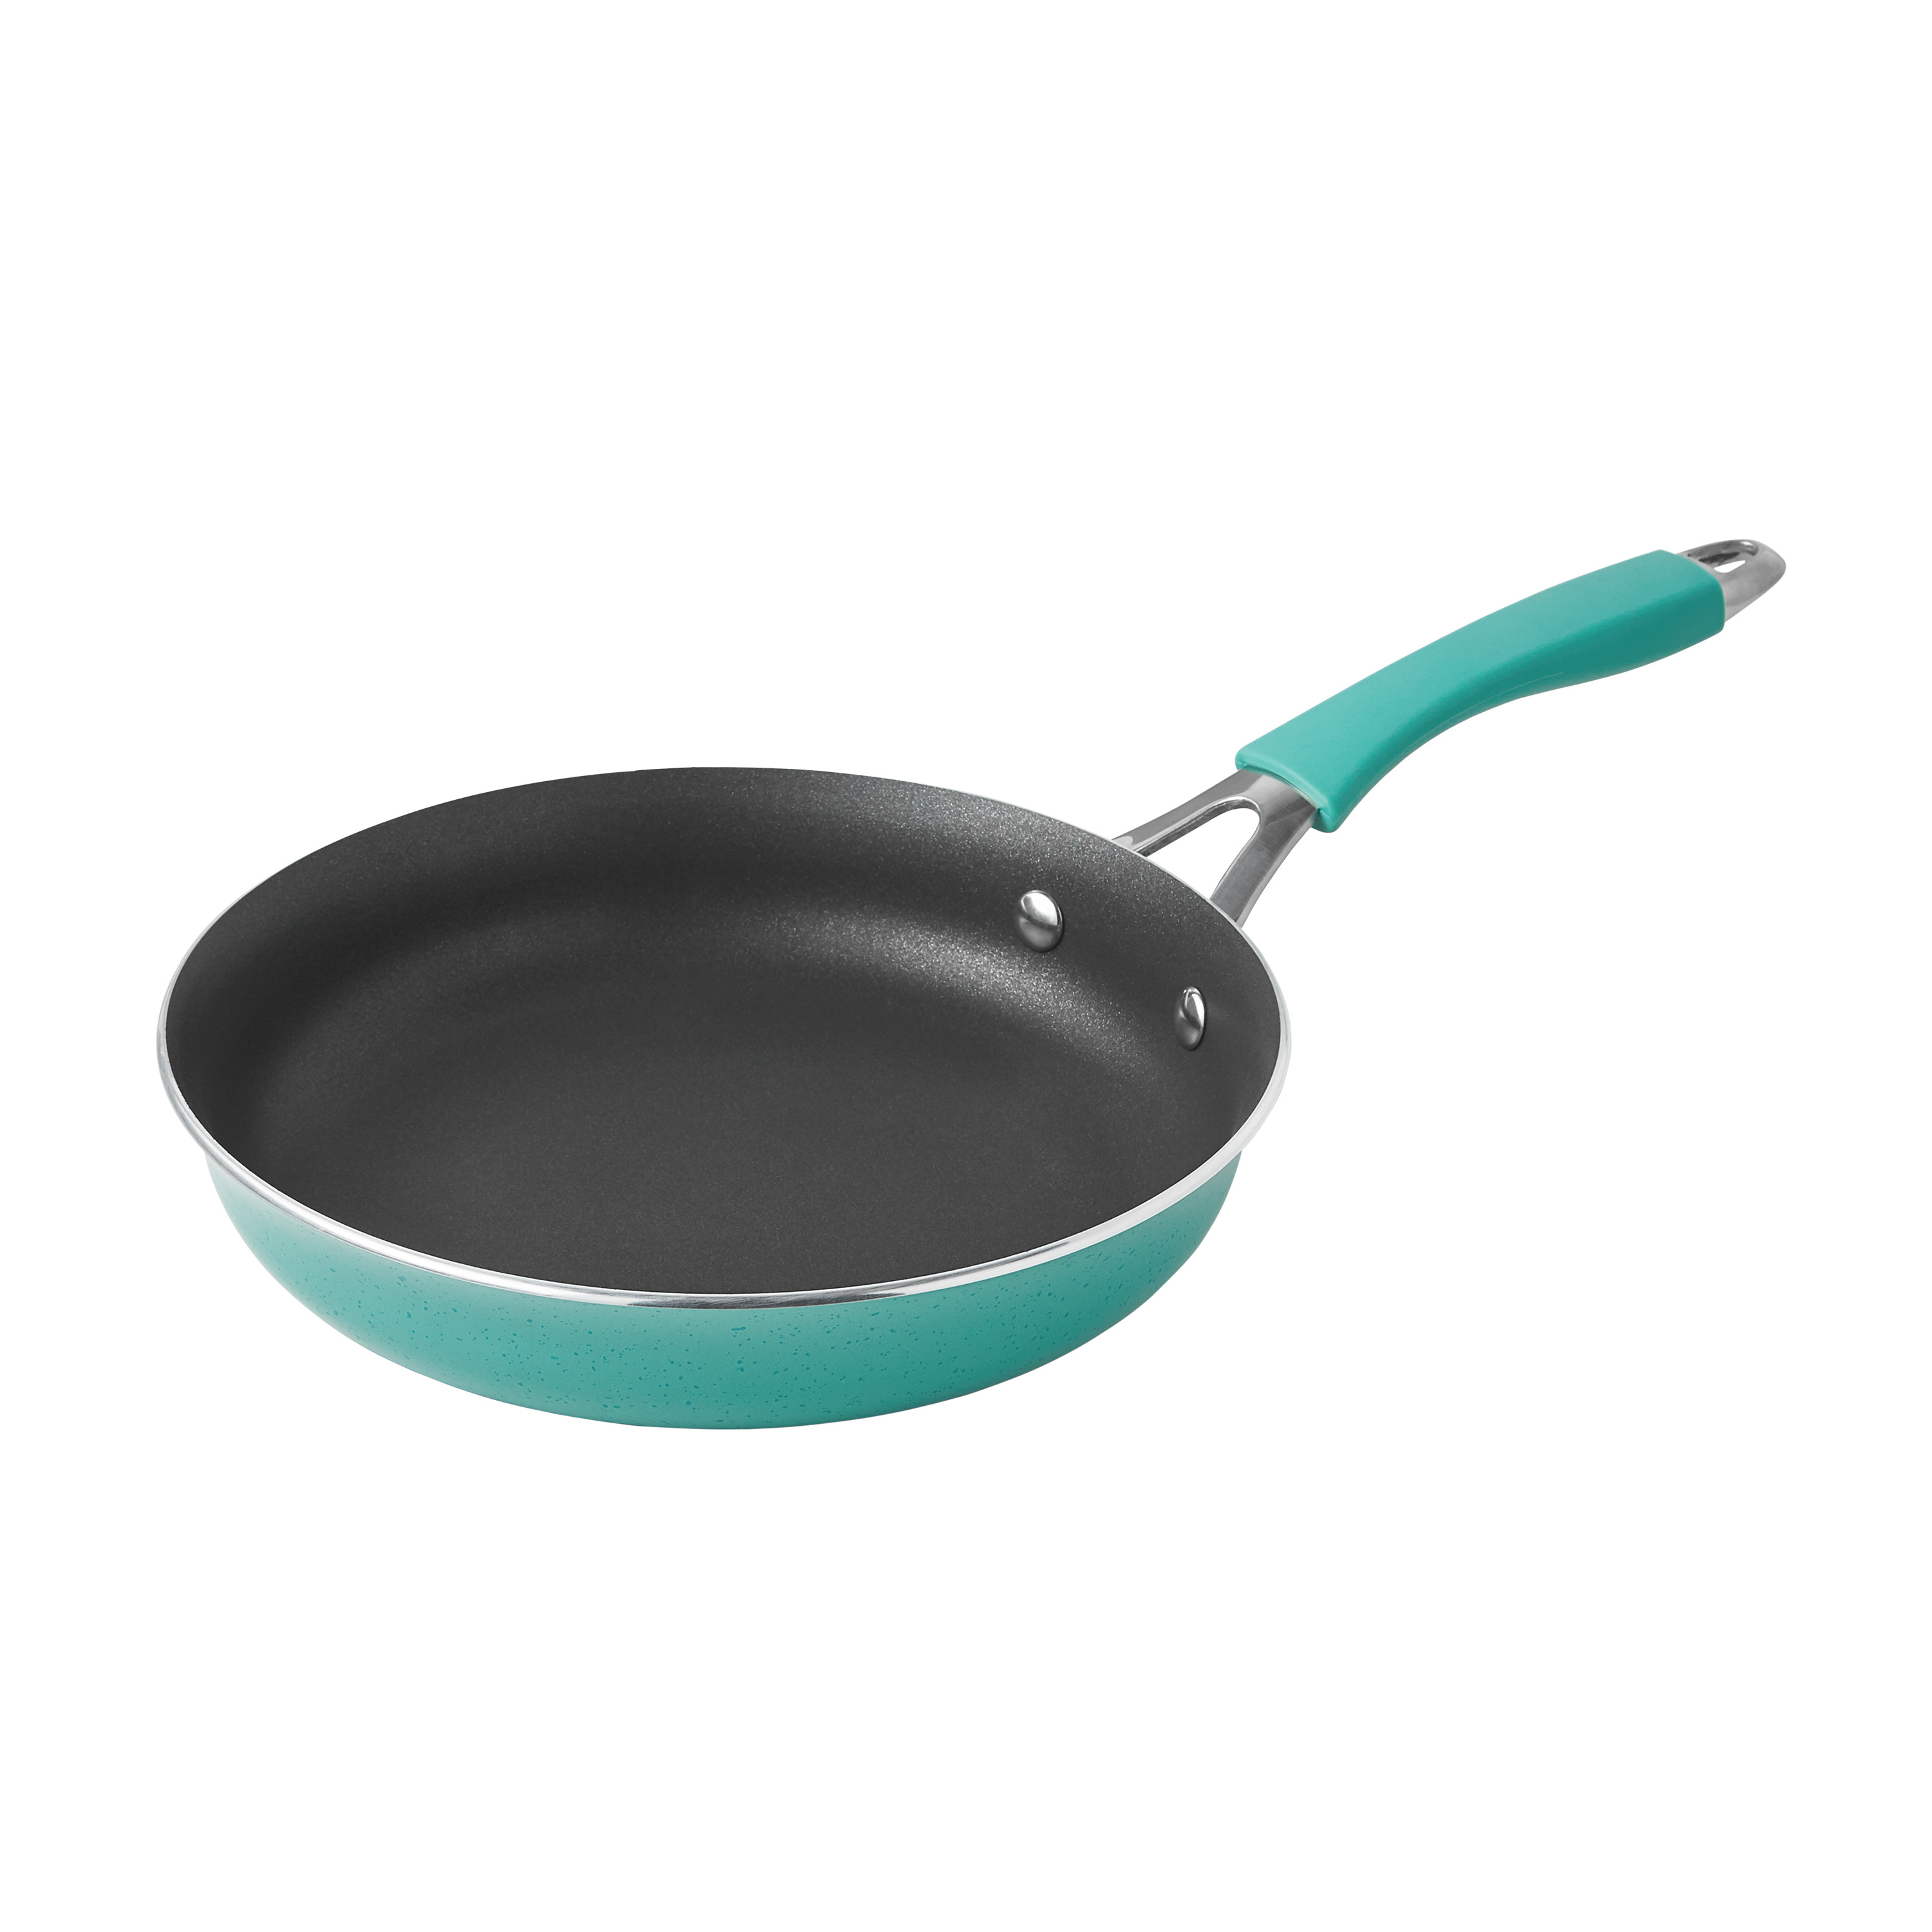 The Pioneer Woman Blooming Bouquet Aluminum Nonstick 19-Piece Cookware Set, Teal - image 8 of 11